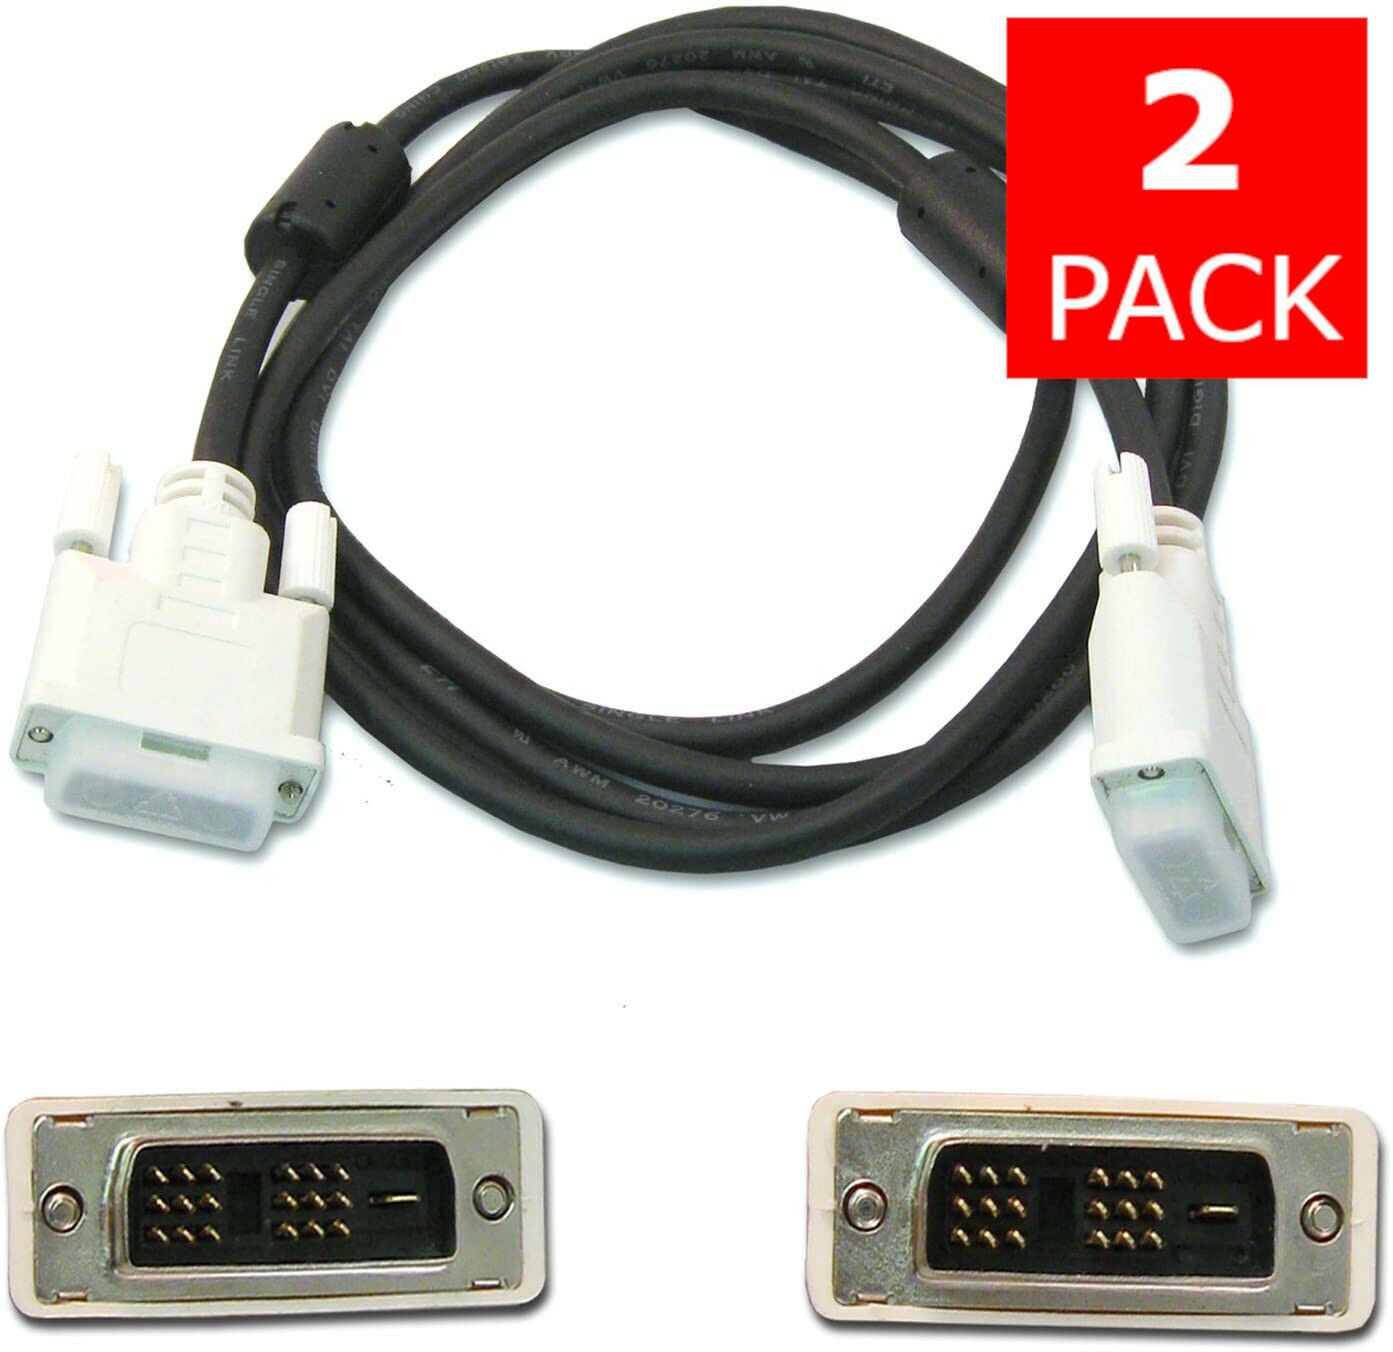 2 PACK of NEW DVI Cable M-M DVI-D 5ft Long Cord 18-Pin Monitor Cable